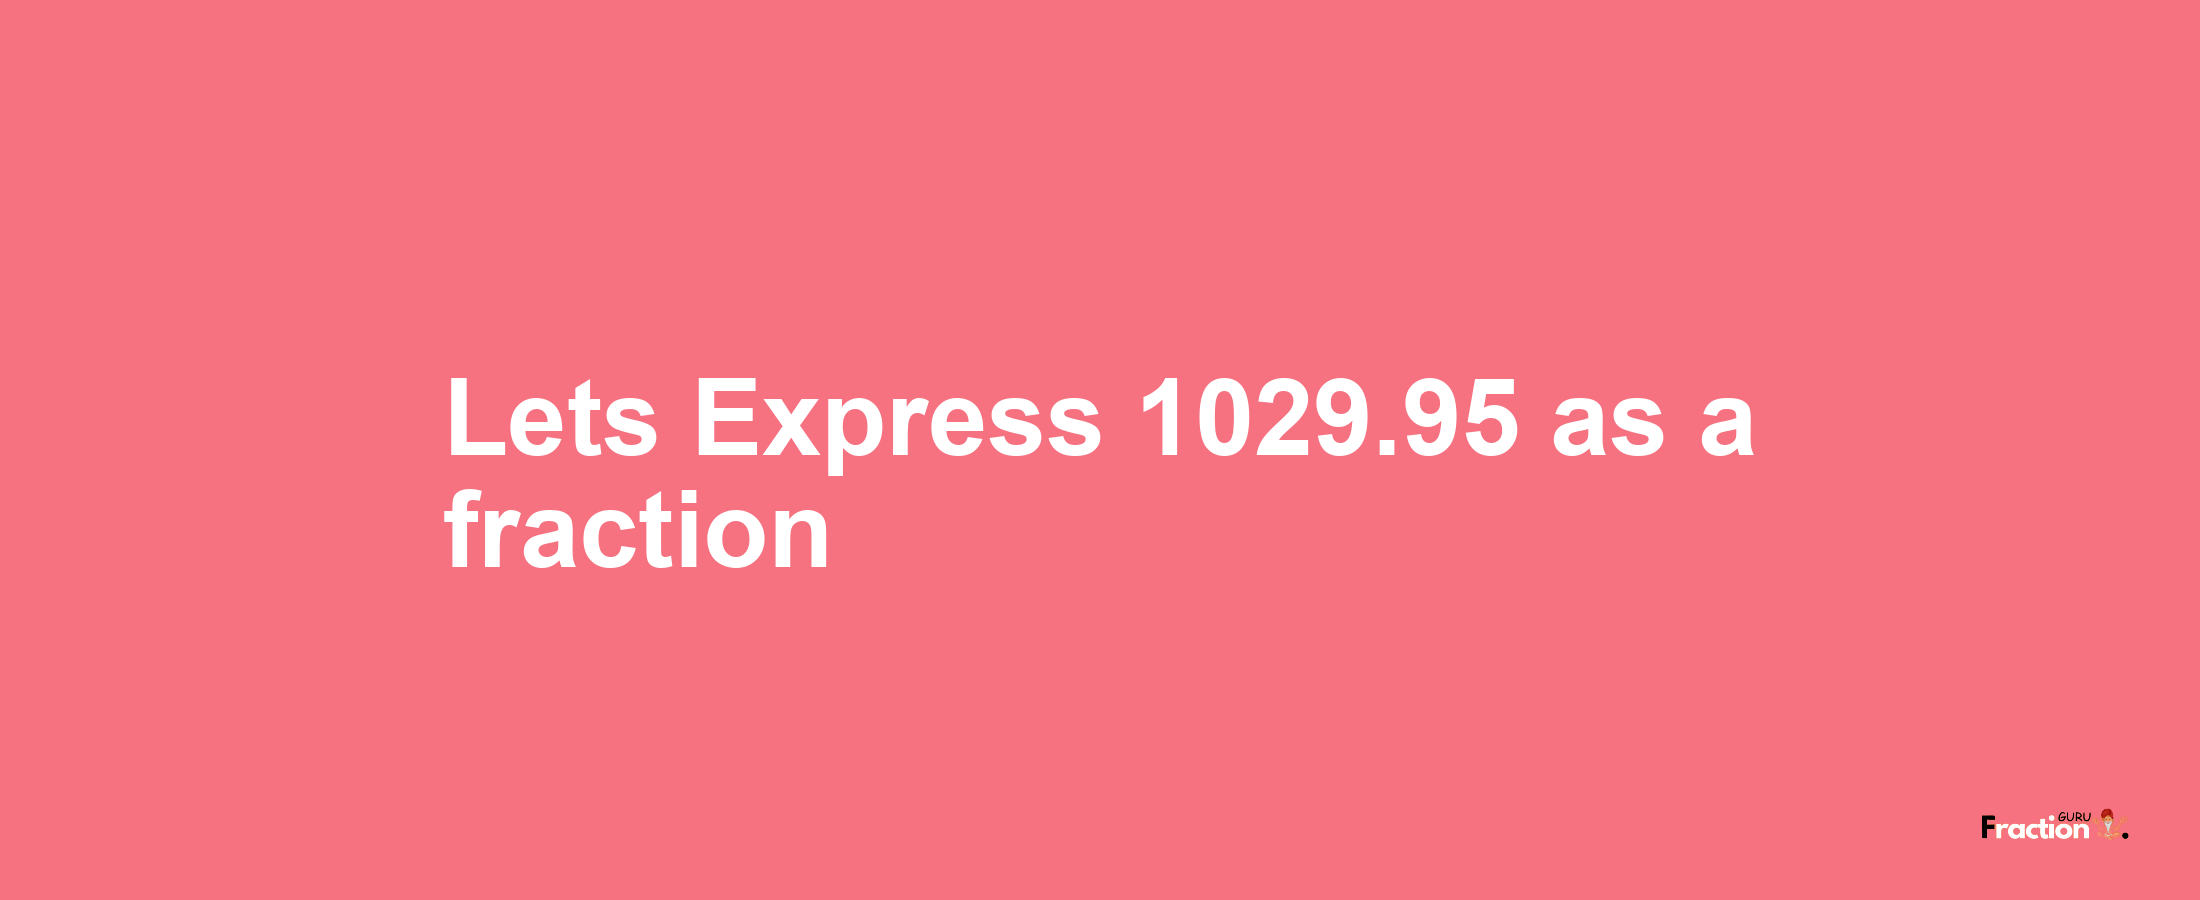 Lets Express 1029.95 as afraction